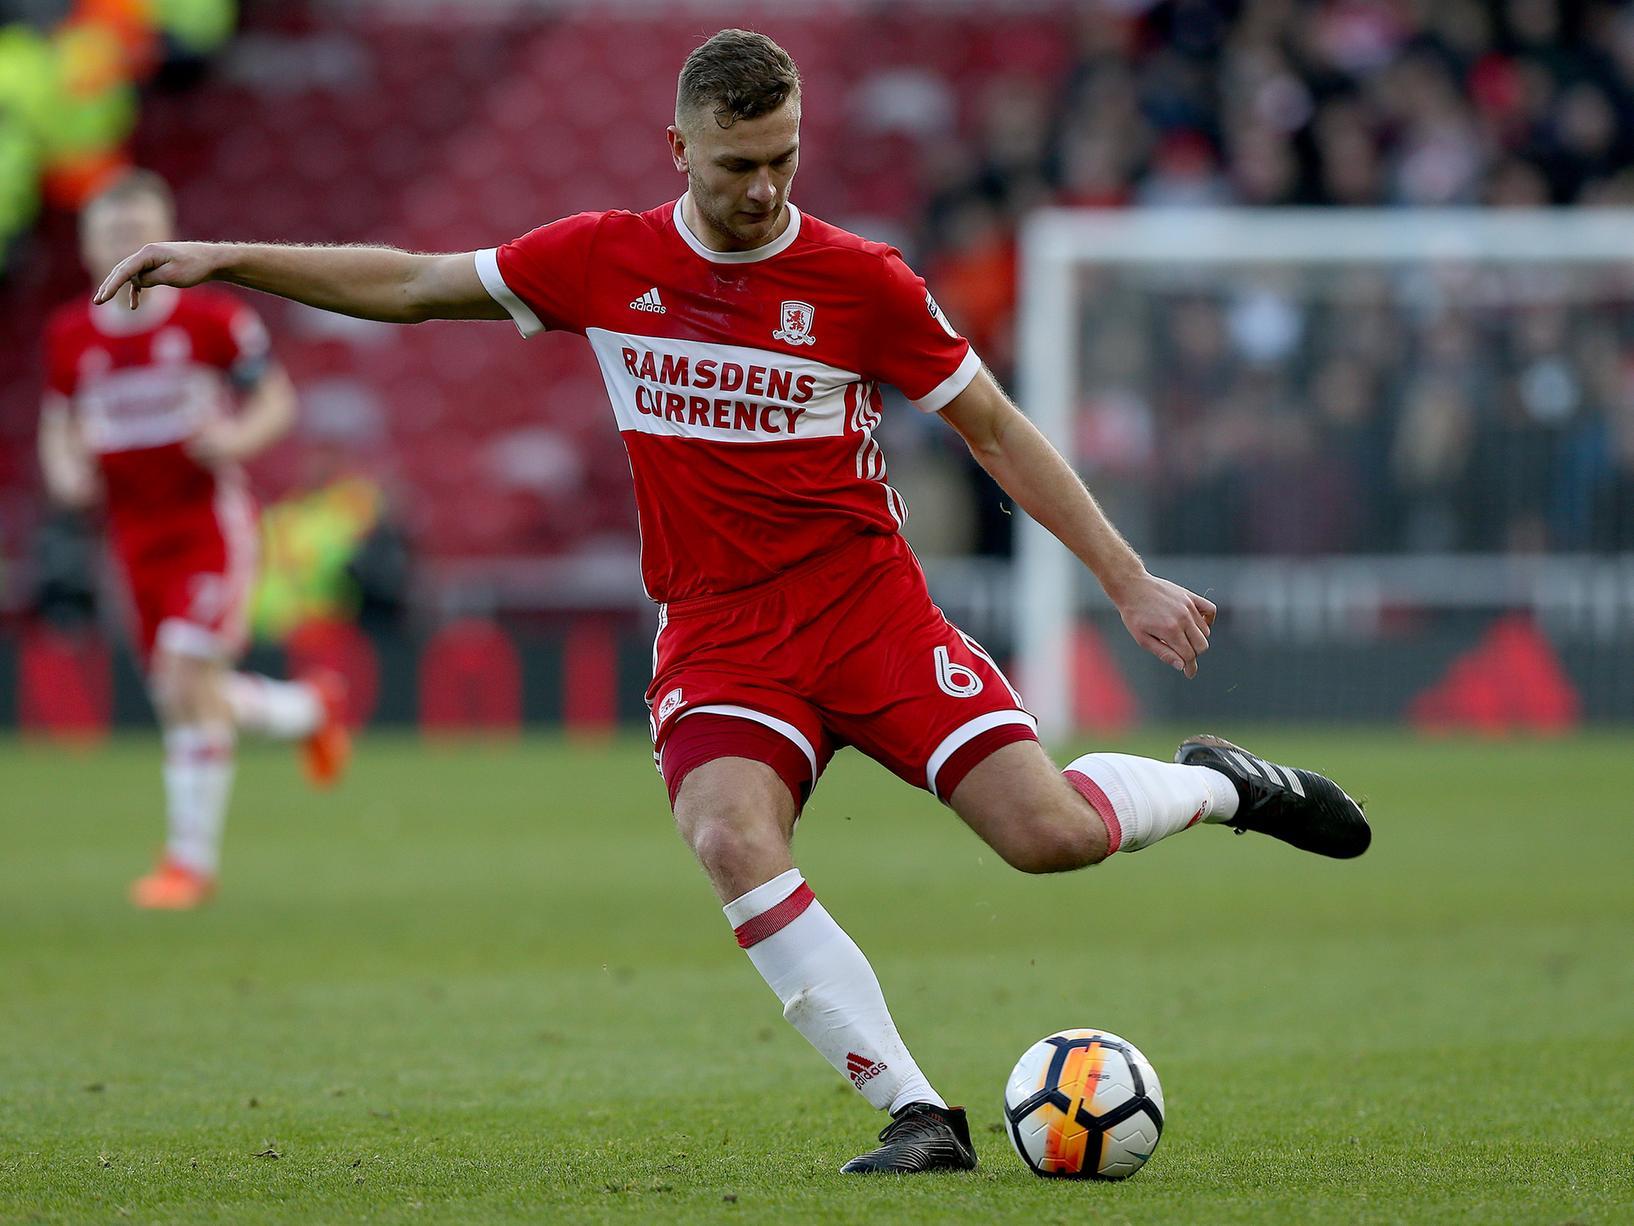 The ex-Middlesbrough man has been linked with a move to Germany but the Bookies aren't offering any odds at the moment.